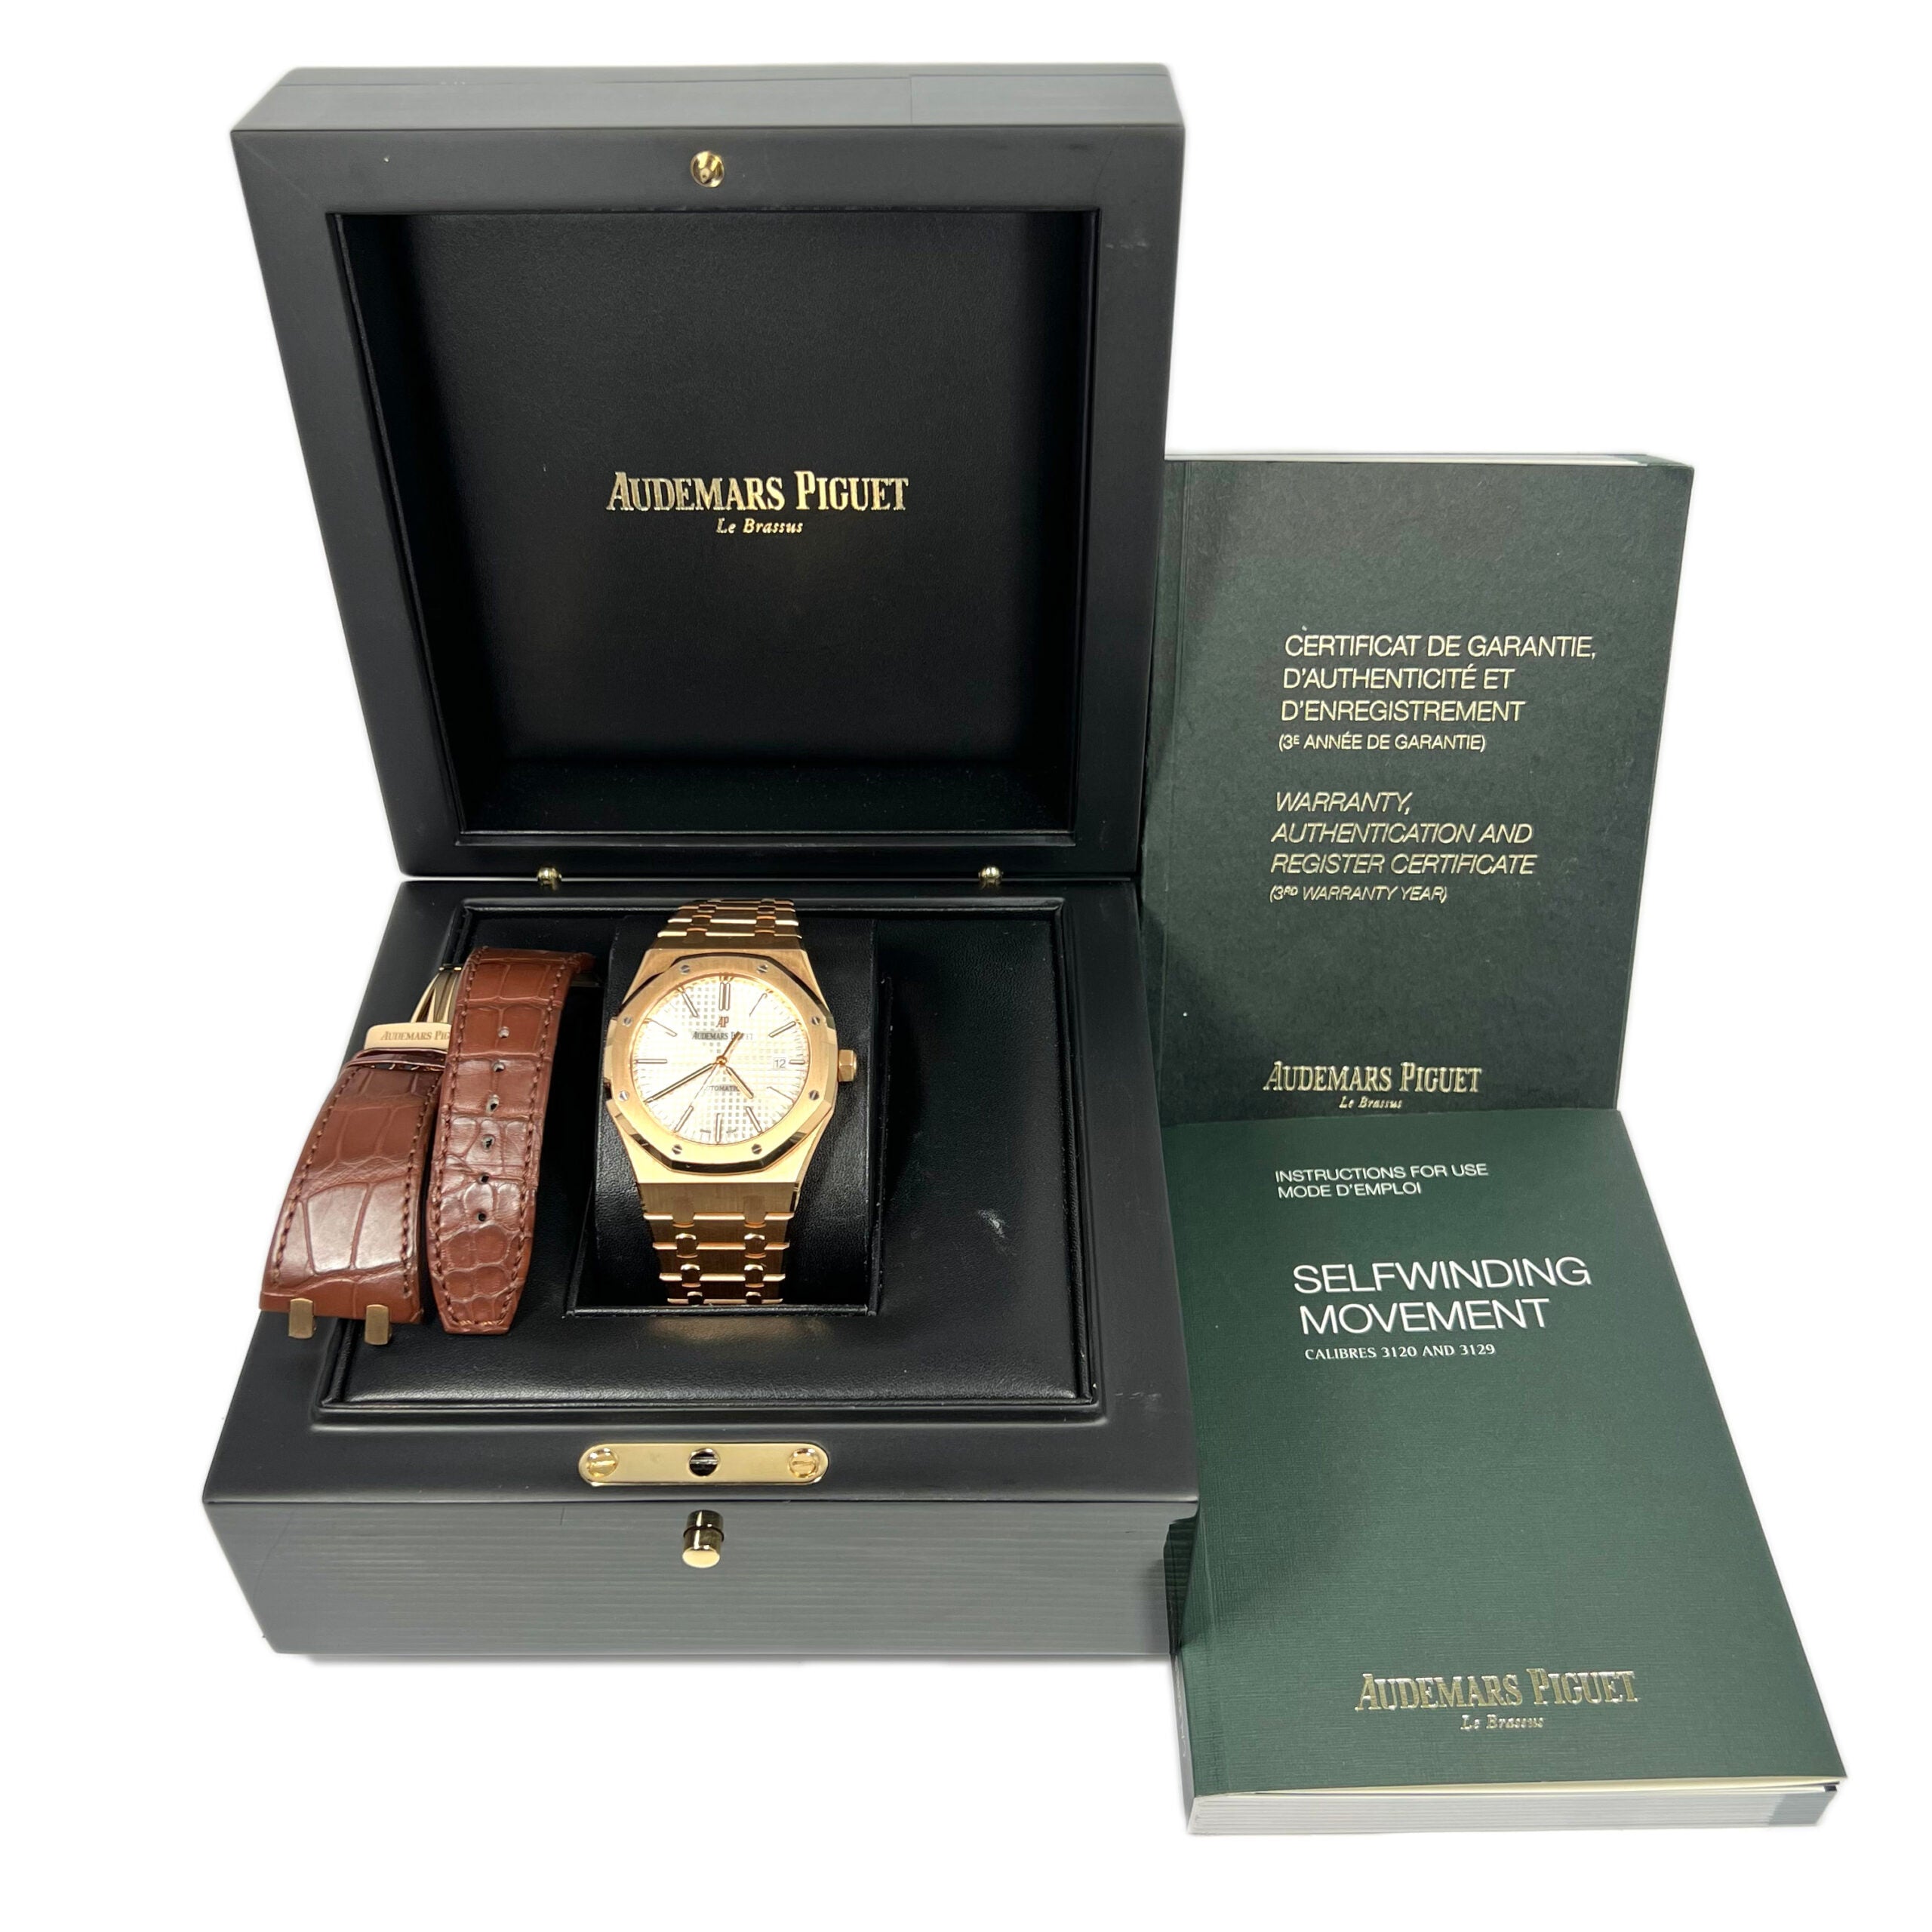 Audemars Piguet - Authenticated Royal Oak Lady Watch - Pink Gold Gold for Women, Very Good Condition